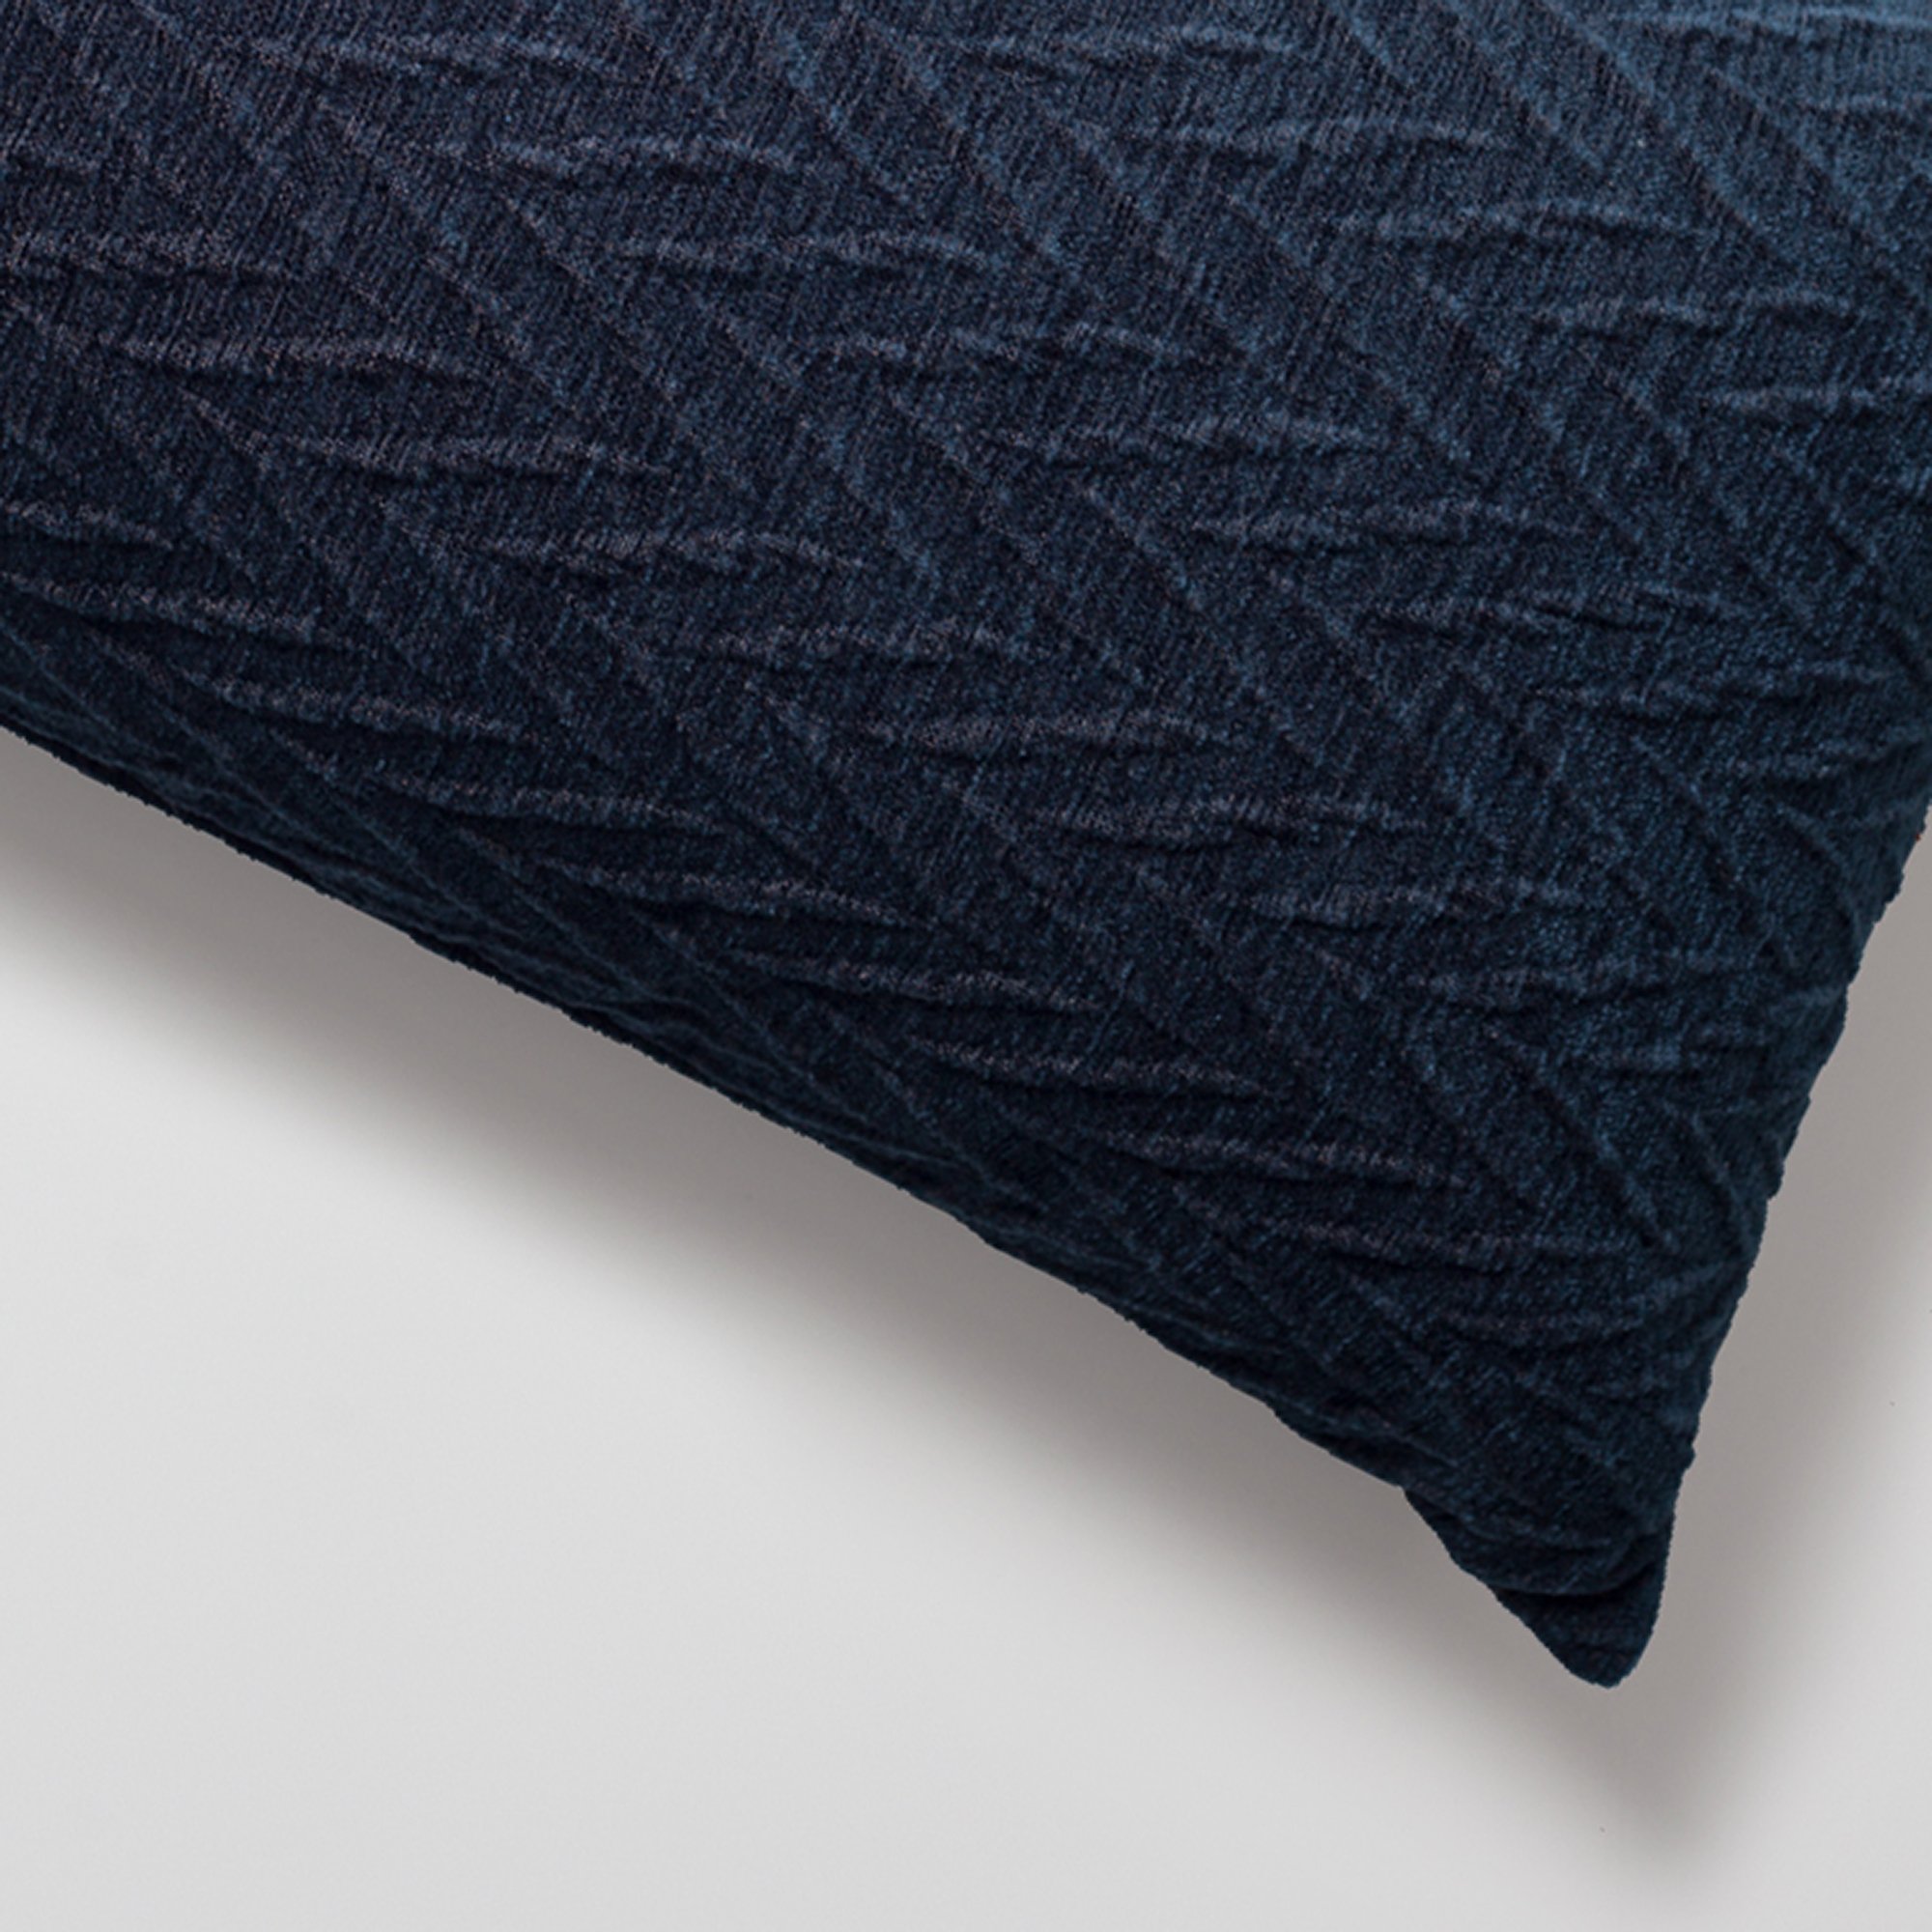 "Cello" - Embossed Pattern Cushion 14x28 Inch - Navy Blue (Cover Only)